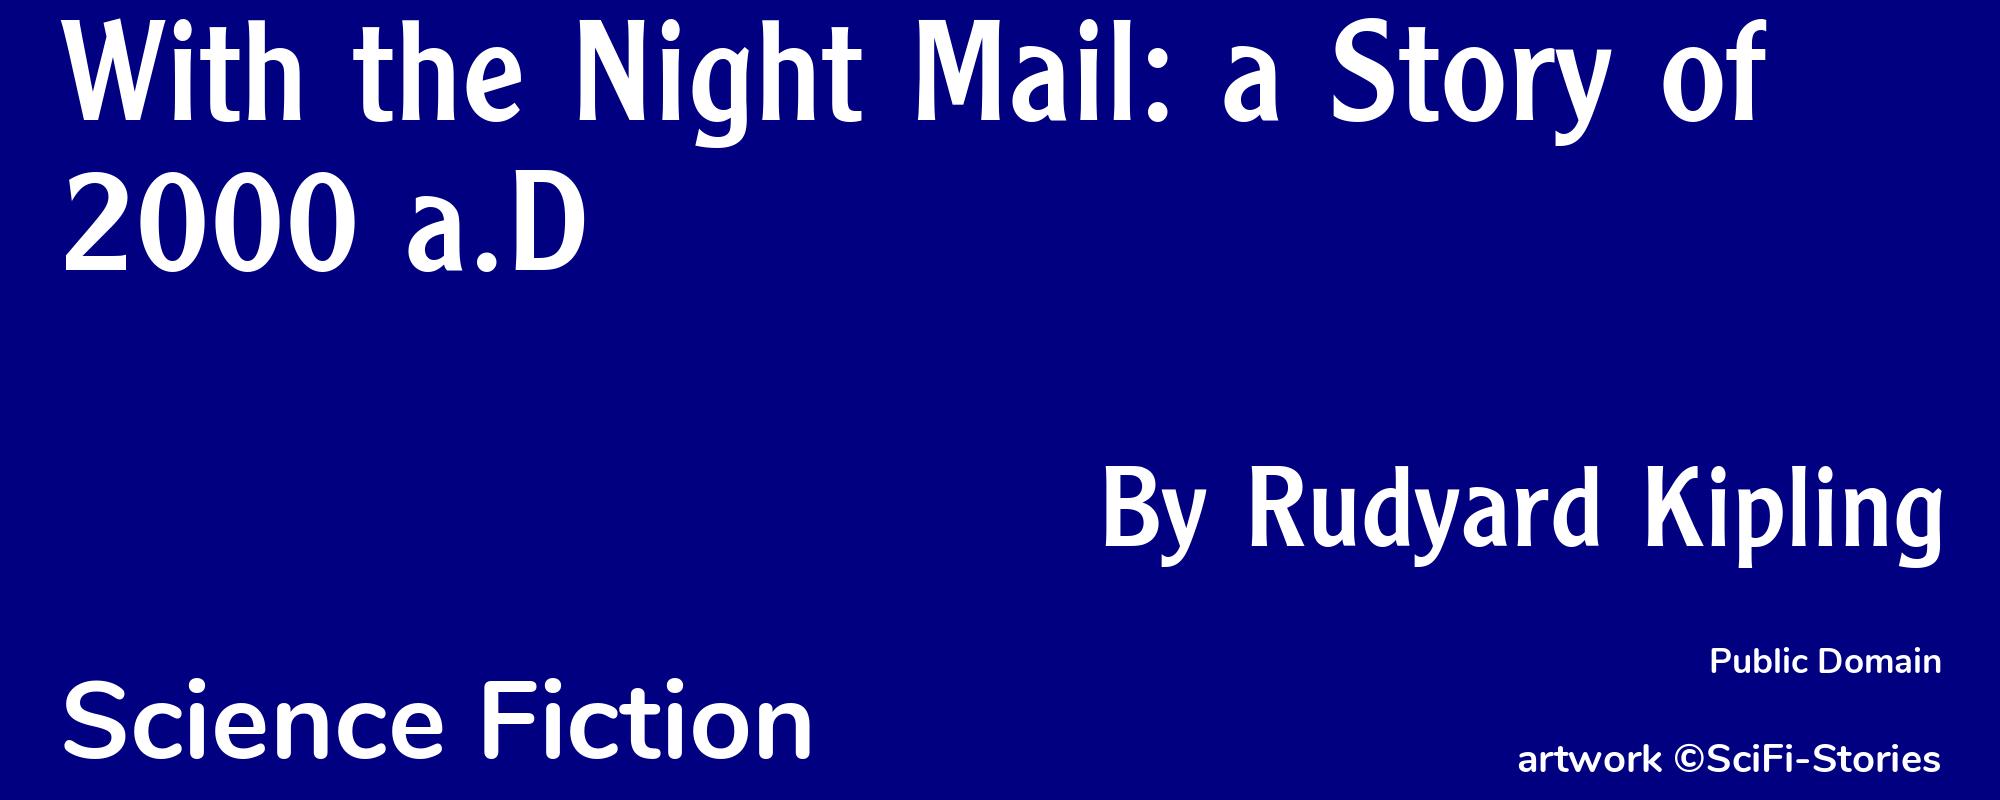 With the Night Mail: a Story of 2000 a.D - Cover